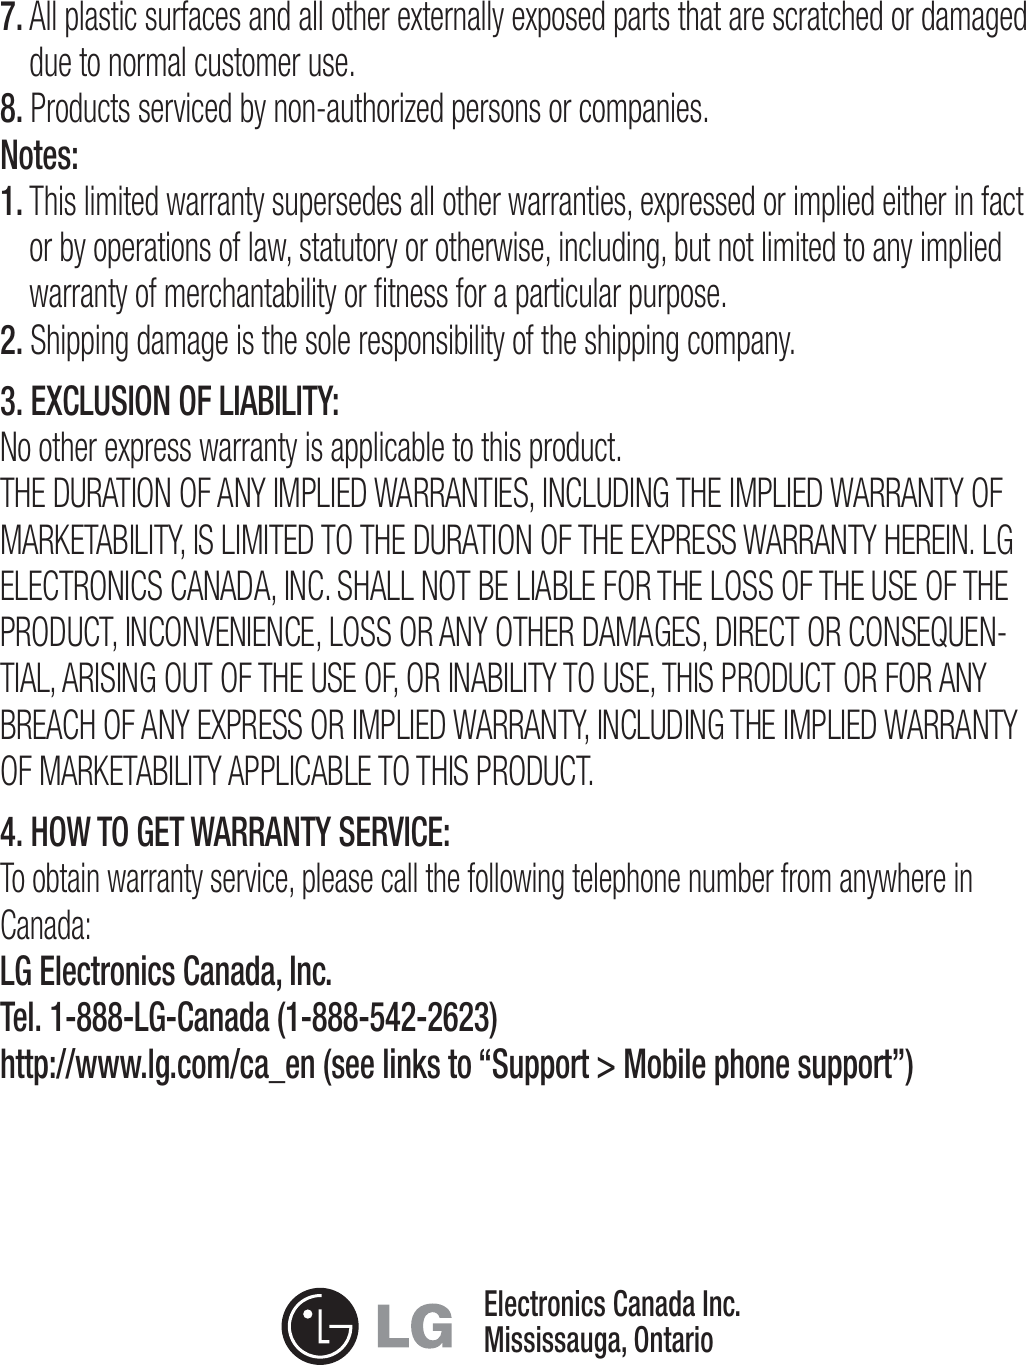 7.  All plastic surfaces and all other externally exposed parts that are scratched or damaged due to normal customer use.8. Products serviced by non-authorized persons or companies.Notes:1.  This limited warranty supersedes all other warranties, expressed or implied either in fact or by operations of law, statutory or otherwise, including, but not limited to any implied warranty of merchantability or ﬁtness for a particular purpose.2.  Shipping damage is the sole responsibility of the shipping company.3. EXCLUSION OF LIABILITY:No other express warranty is applicable to this product.5)&amp;%63&quot;5*0/0&apos;&quot;/:*.1-*&amp;%8&quot;33&quot;/5*&amp;4*/$-6%*/(5)&amp;*.1-*&amp;%8&quot;33&quot;/5:0&apos;.&quot;3,&amp;5&quot;#*-*5:*4-*.*5&amp;%505)&amp;%63&quot;5*0/0&apos;5)&amp;&amp;913&amp;448&quot;33&quot;/5:)&amp;3&amp;*/-(&amp;-&amp;$530/*$4$&quot;/&quot;%&quot;*/$4)&quot;--/05#&amp;-*&quot;#-&amp;&apos;035)&amp;-0440&apos;5)&amp;64&amp;0&apos;5)&amp;130%6$5*/$0/7&amp;/*&amp;/$&amp;-04403&quot;/:05)&amp;3%&quot;.&quot;(&amp;4%*3&amp;$503$0/4&amp;26&amp;/-5*&quot;-&quot;3*4*/(0650&apos;5)&amp;64&amp;0&apos;03*/&quot;#*-*5:5064&amp;5)*4130%6$503&apos;03&quot;/:#3&amp;&quot;$)0&apos;&quot;/:&amp;913&amp;4403*.1-*&amp;%8&quot;33&quot;/5:*/$-6%*/(5)&amp;*.1-*&amp;%8&quot;33&quot;/5:0&apos;.&quot;3,&amp;5&quot;#*-*5:&quot;11-*$&quot;#-&amp;505)*4130%6$54. HOW TO GET WARRANTY SERVICE:To obtain warranty service, please call the following telephone number from anywhere in Canada:LG Electronics Canada, Inc.Tel. 1-888-LG-Canada (1-888-542-2623) http://www.lg.com/ca_en (see links to “Support &gt; Mobile phone support”)Electronics Canada Inc.Mississauga, Ontario